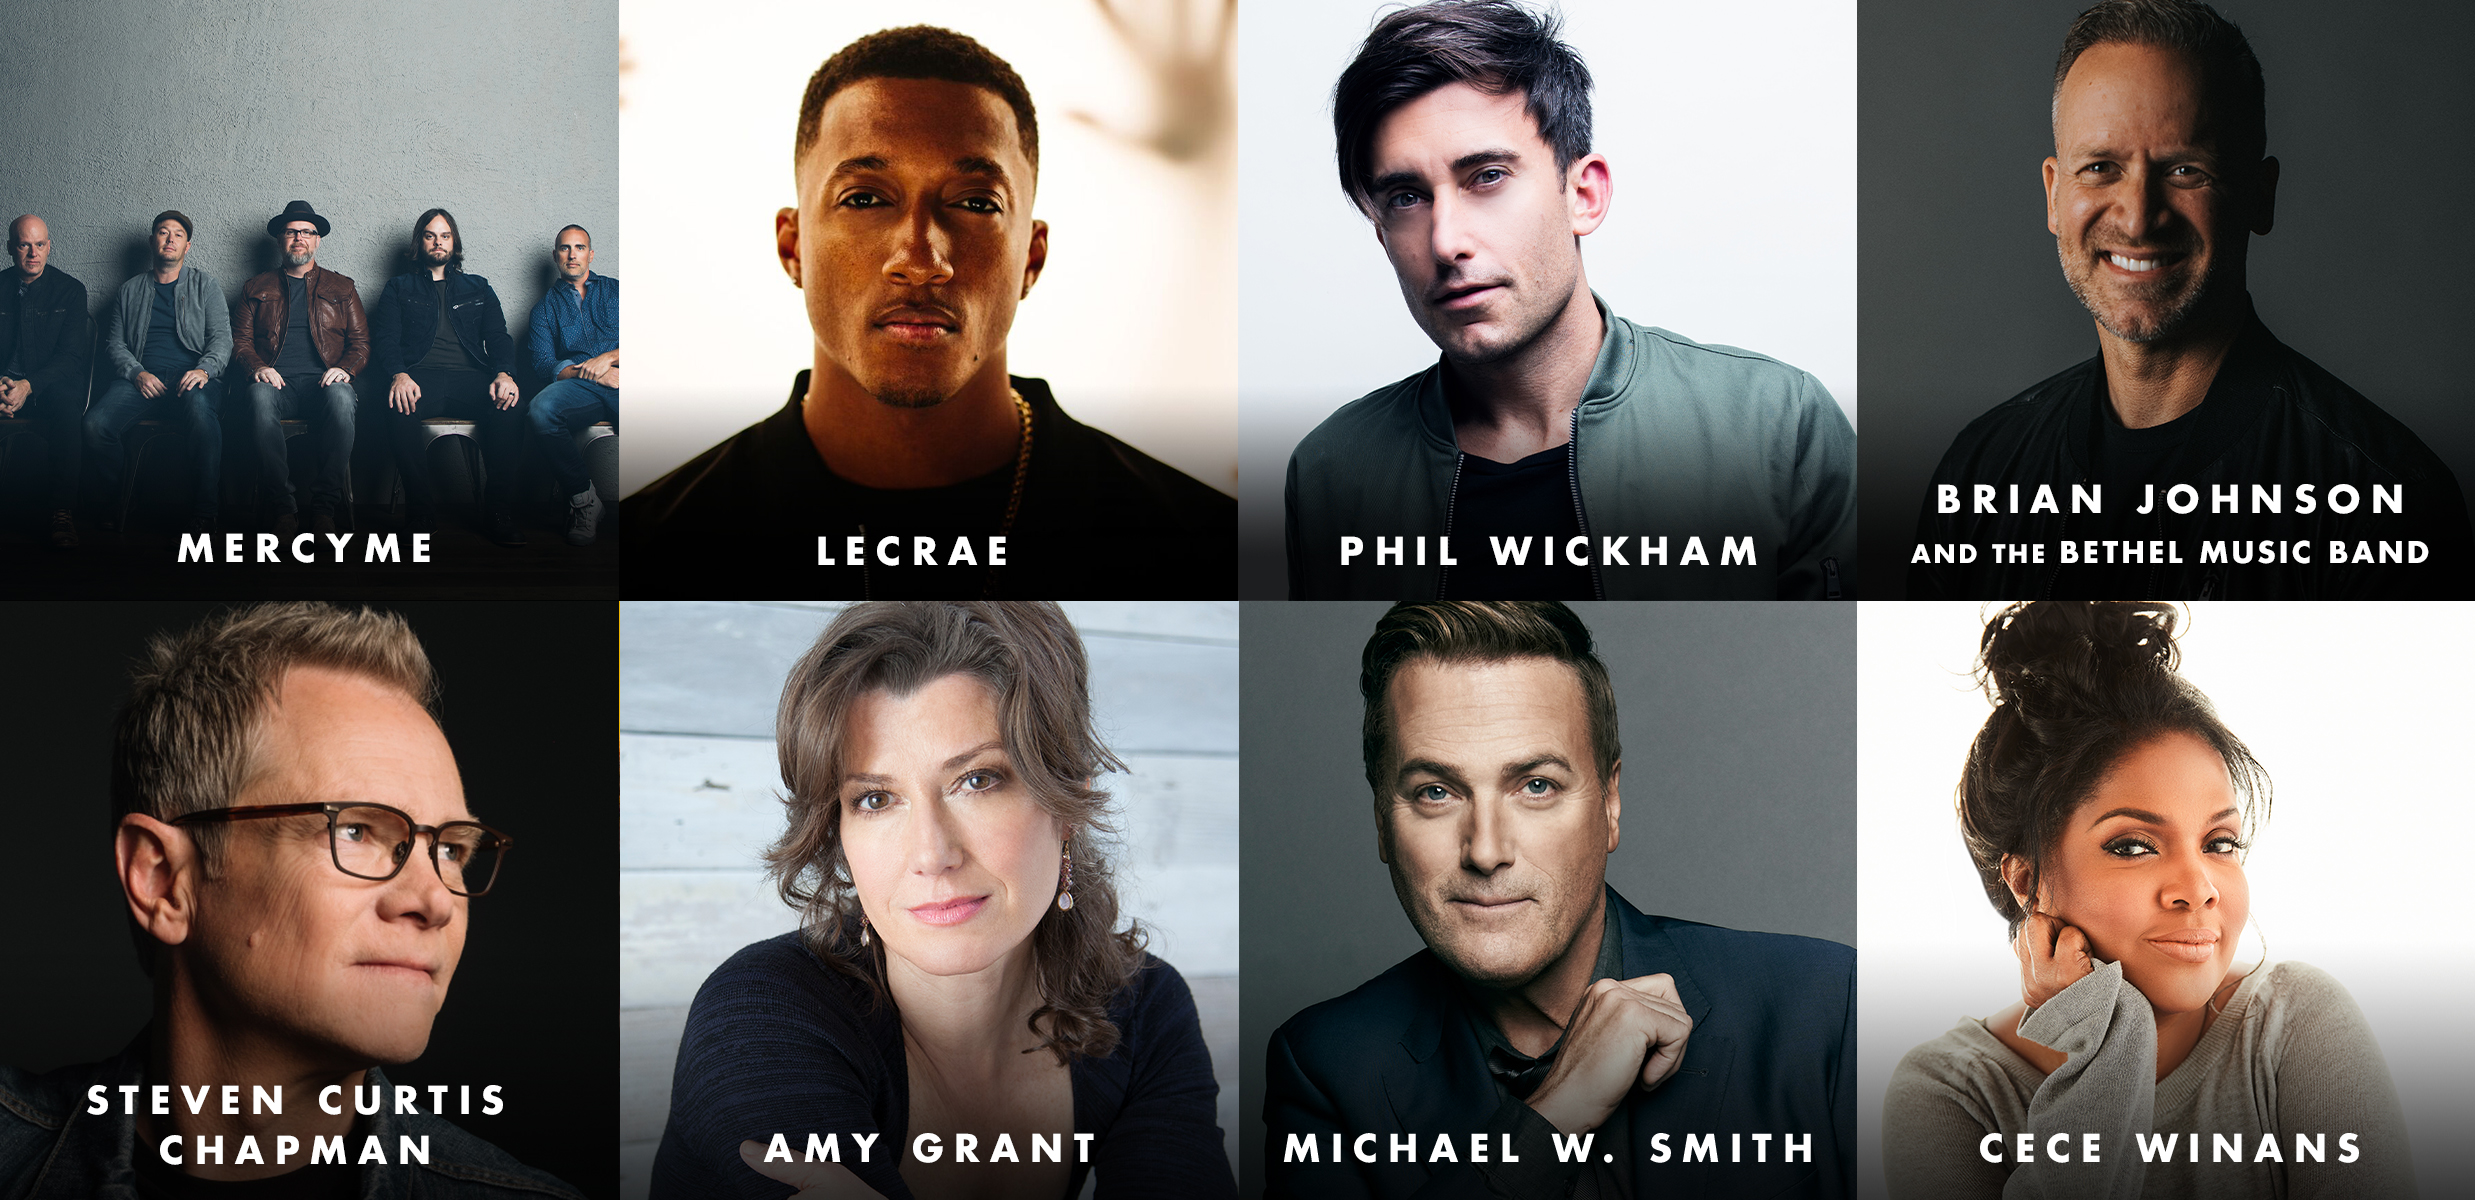 MercyMe, Lecrae, Phil Wickham, Brian Johnson And The Bethel Music Band Set To Perform At Historic 50th Annual Gma Dove Awards